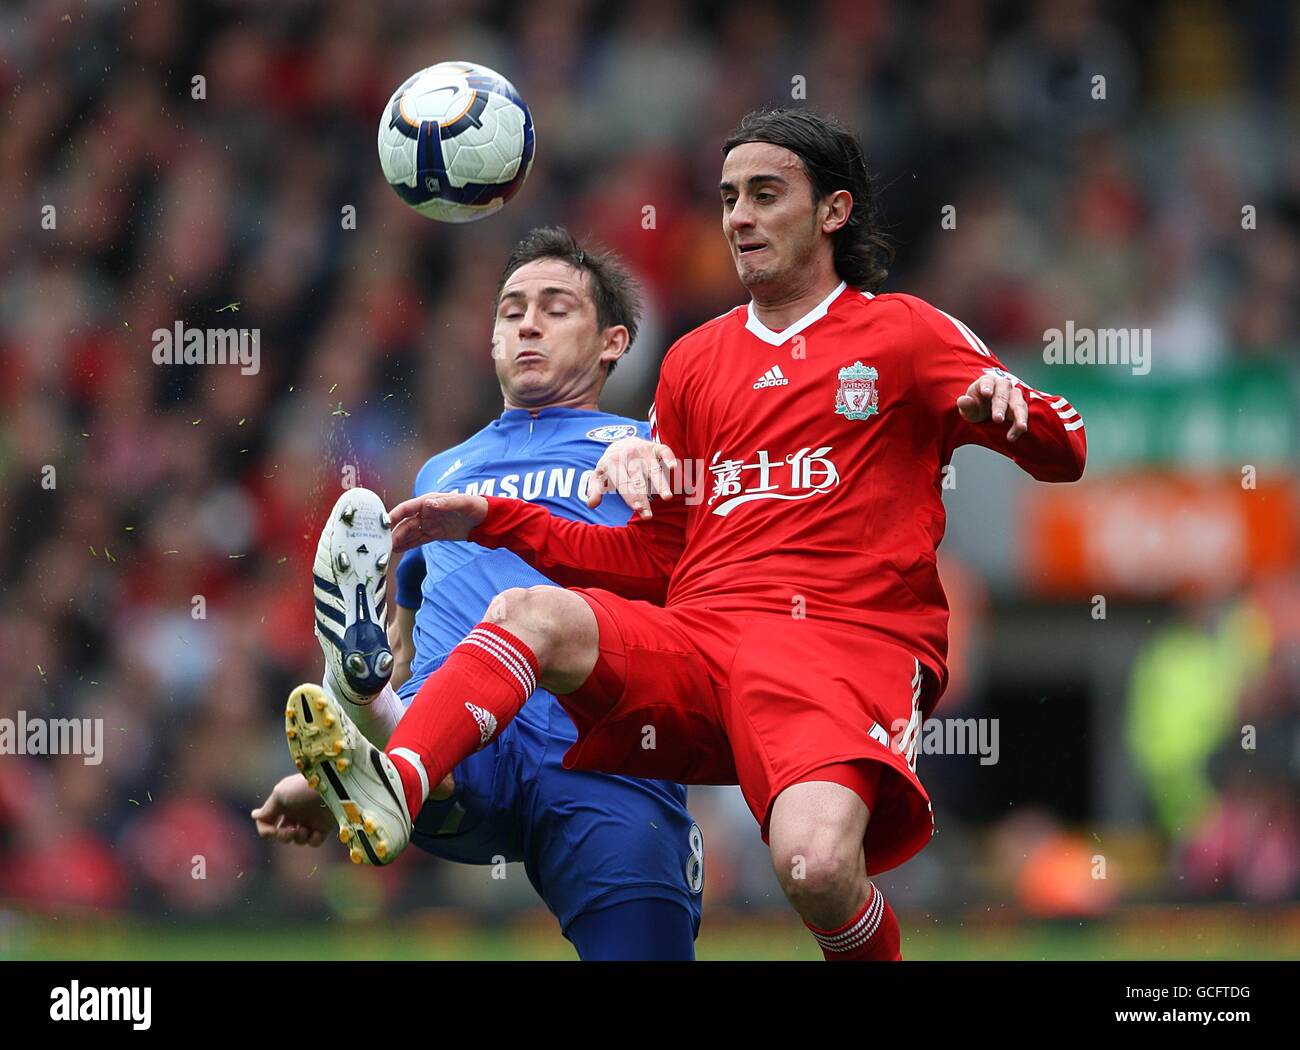 Liverpool Alberto Aquilani (right) and Chelsea's Frank Lampard (left) battle for the ball. Stock Photo